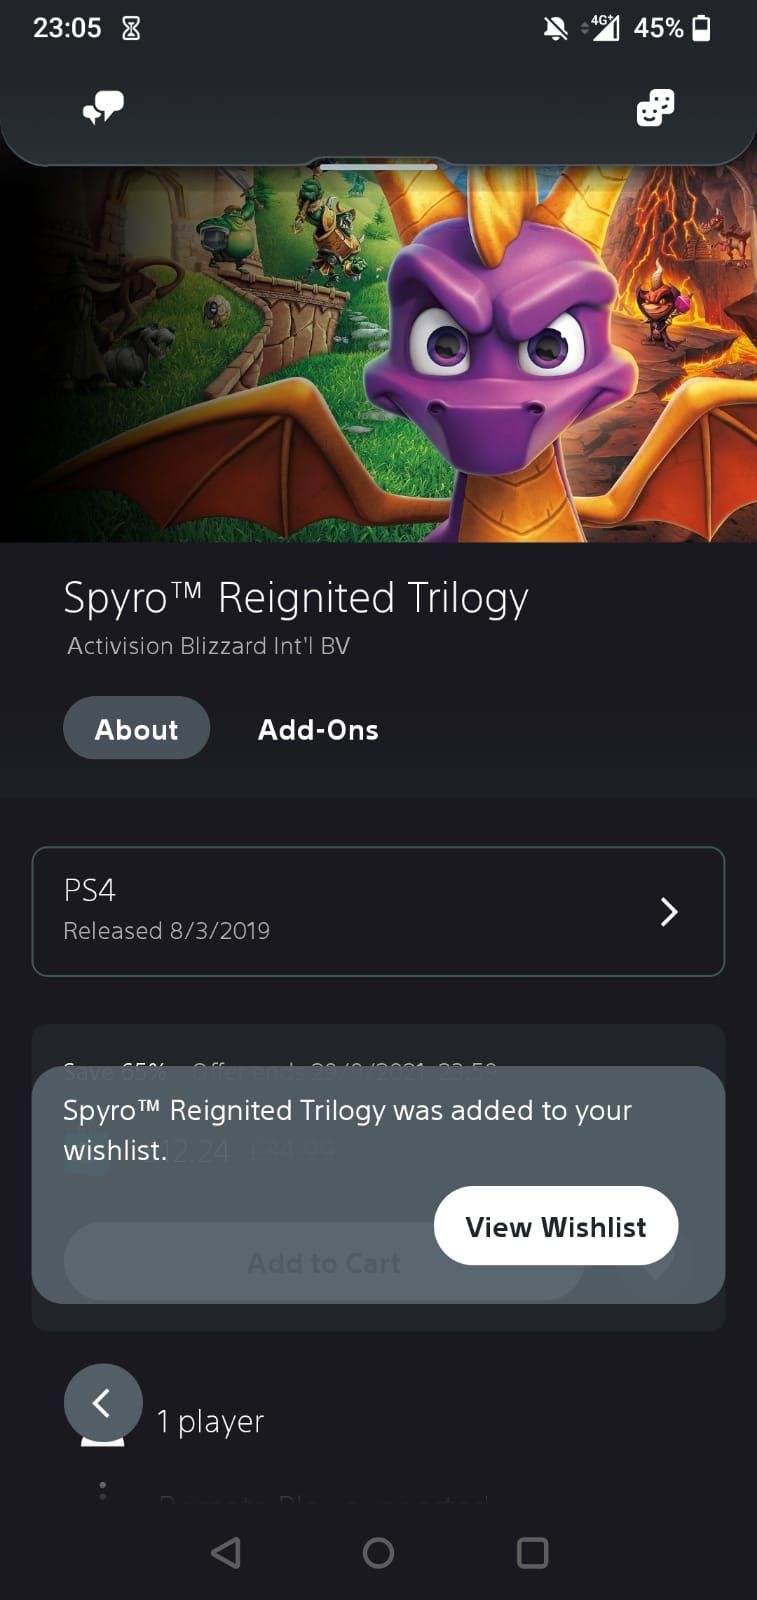 Spyro Reignited Trilogy added to wishlist on the PS app